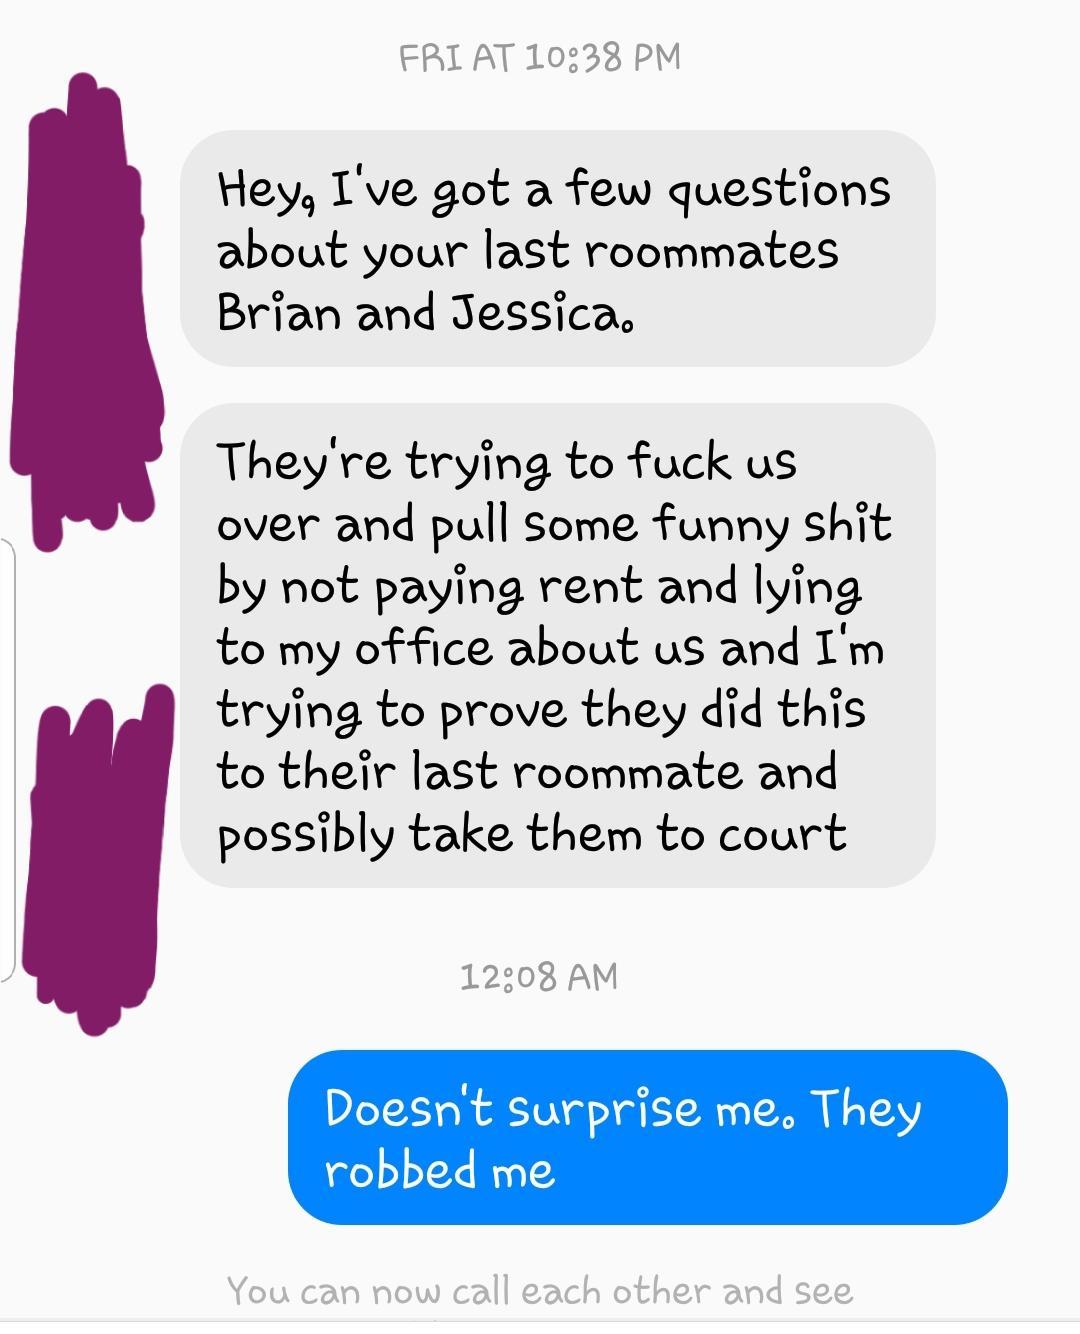 paper - Fri At Hey, I've got a few questions about your last roommates Brian and Jessica They're trying to fuck us over and pull some funny shit by not paying rent and lying to my office about us and I'm trying to prove they did this to their last roommat